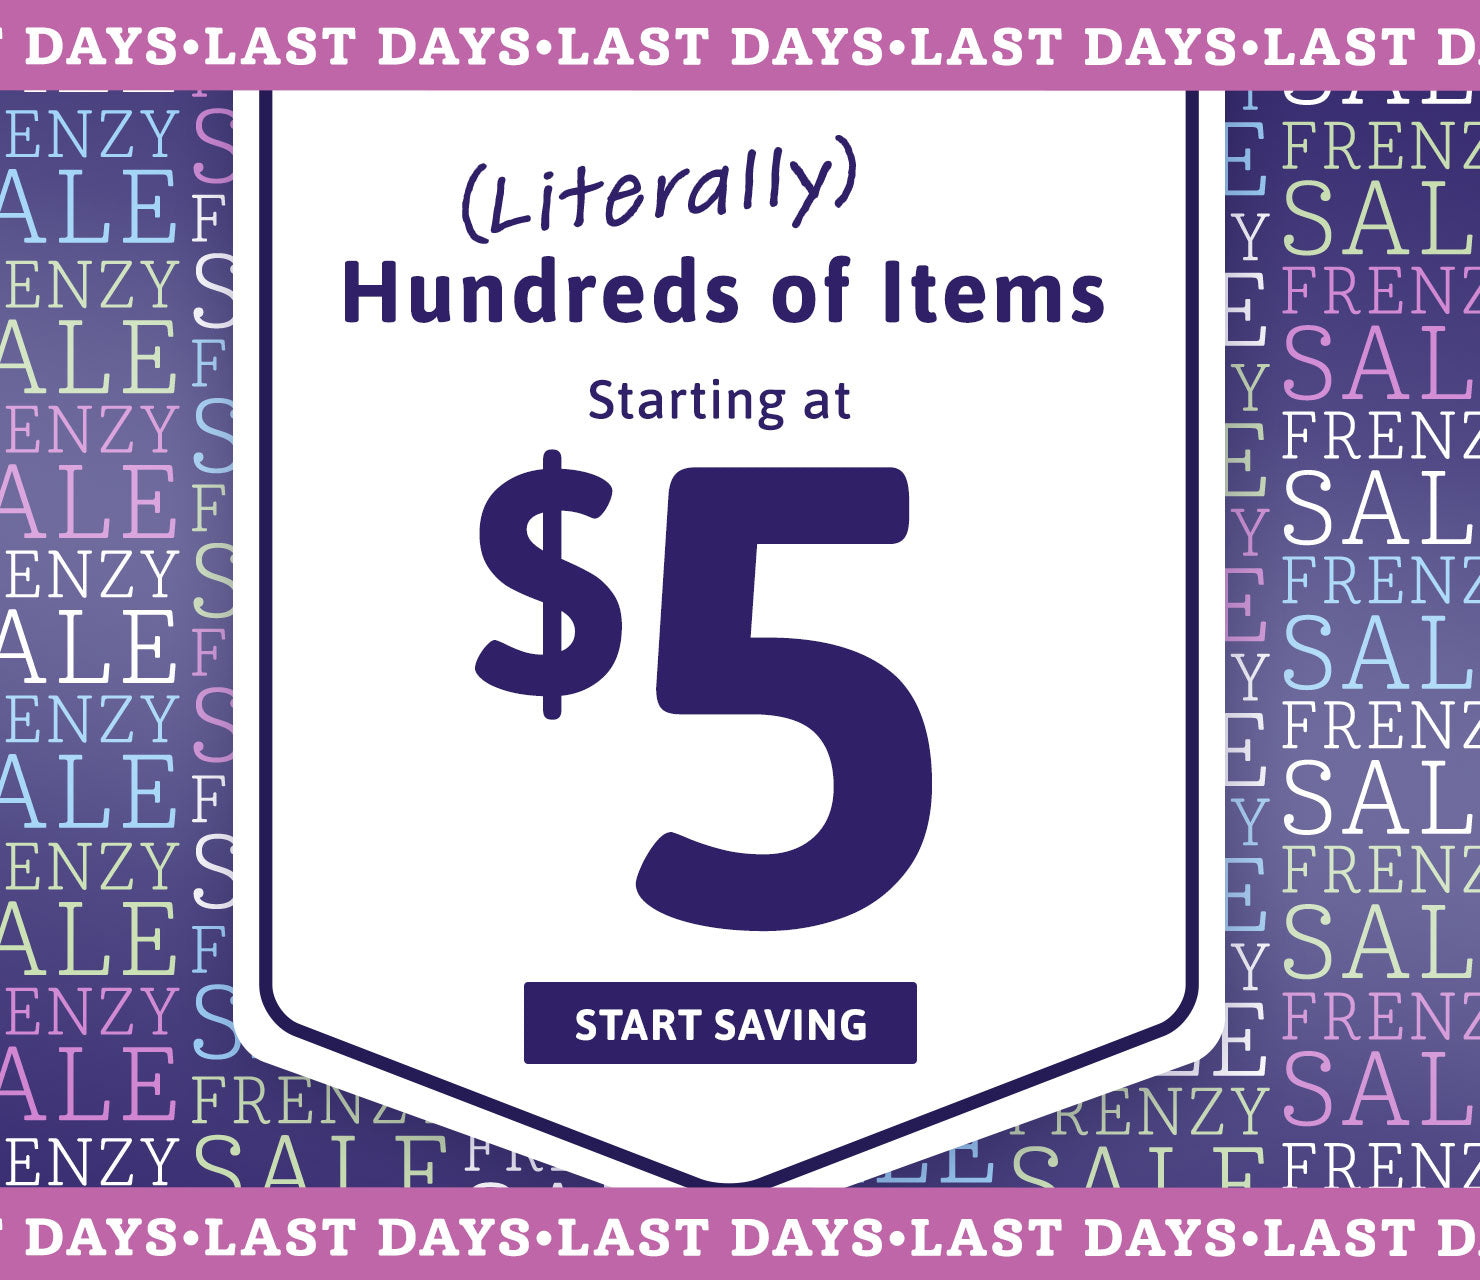 Purple graphic promoting a sale with items starting at $5. Bold text reads 